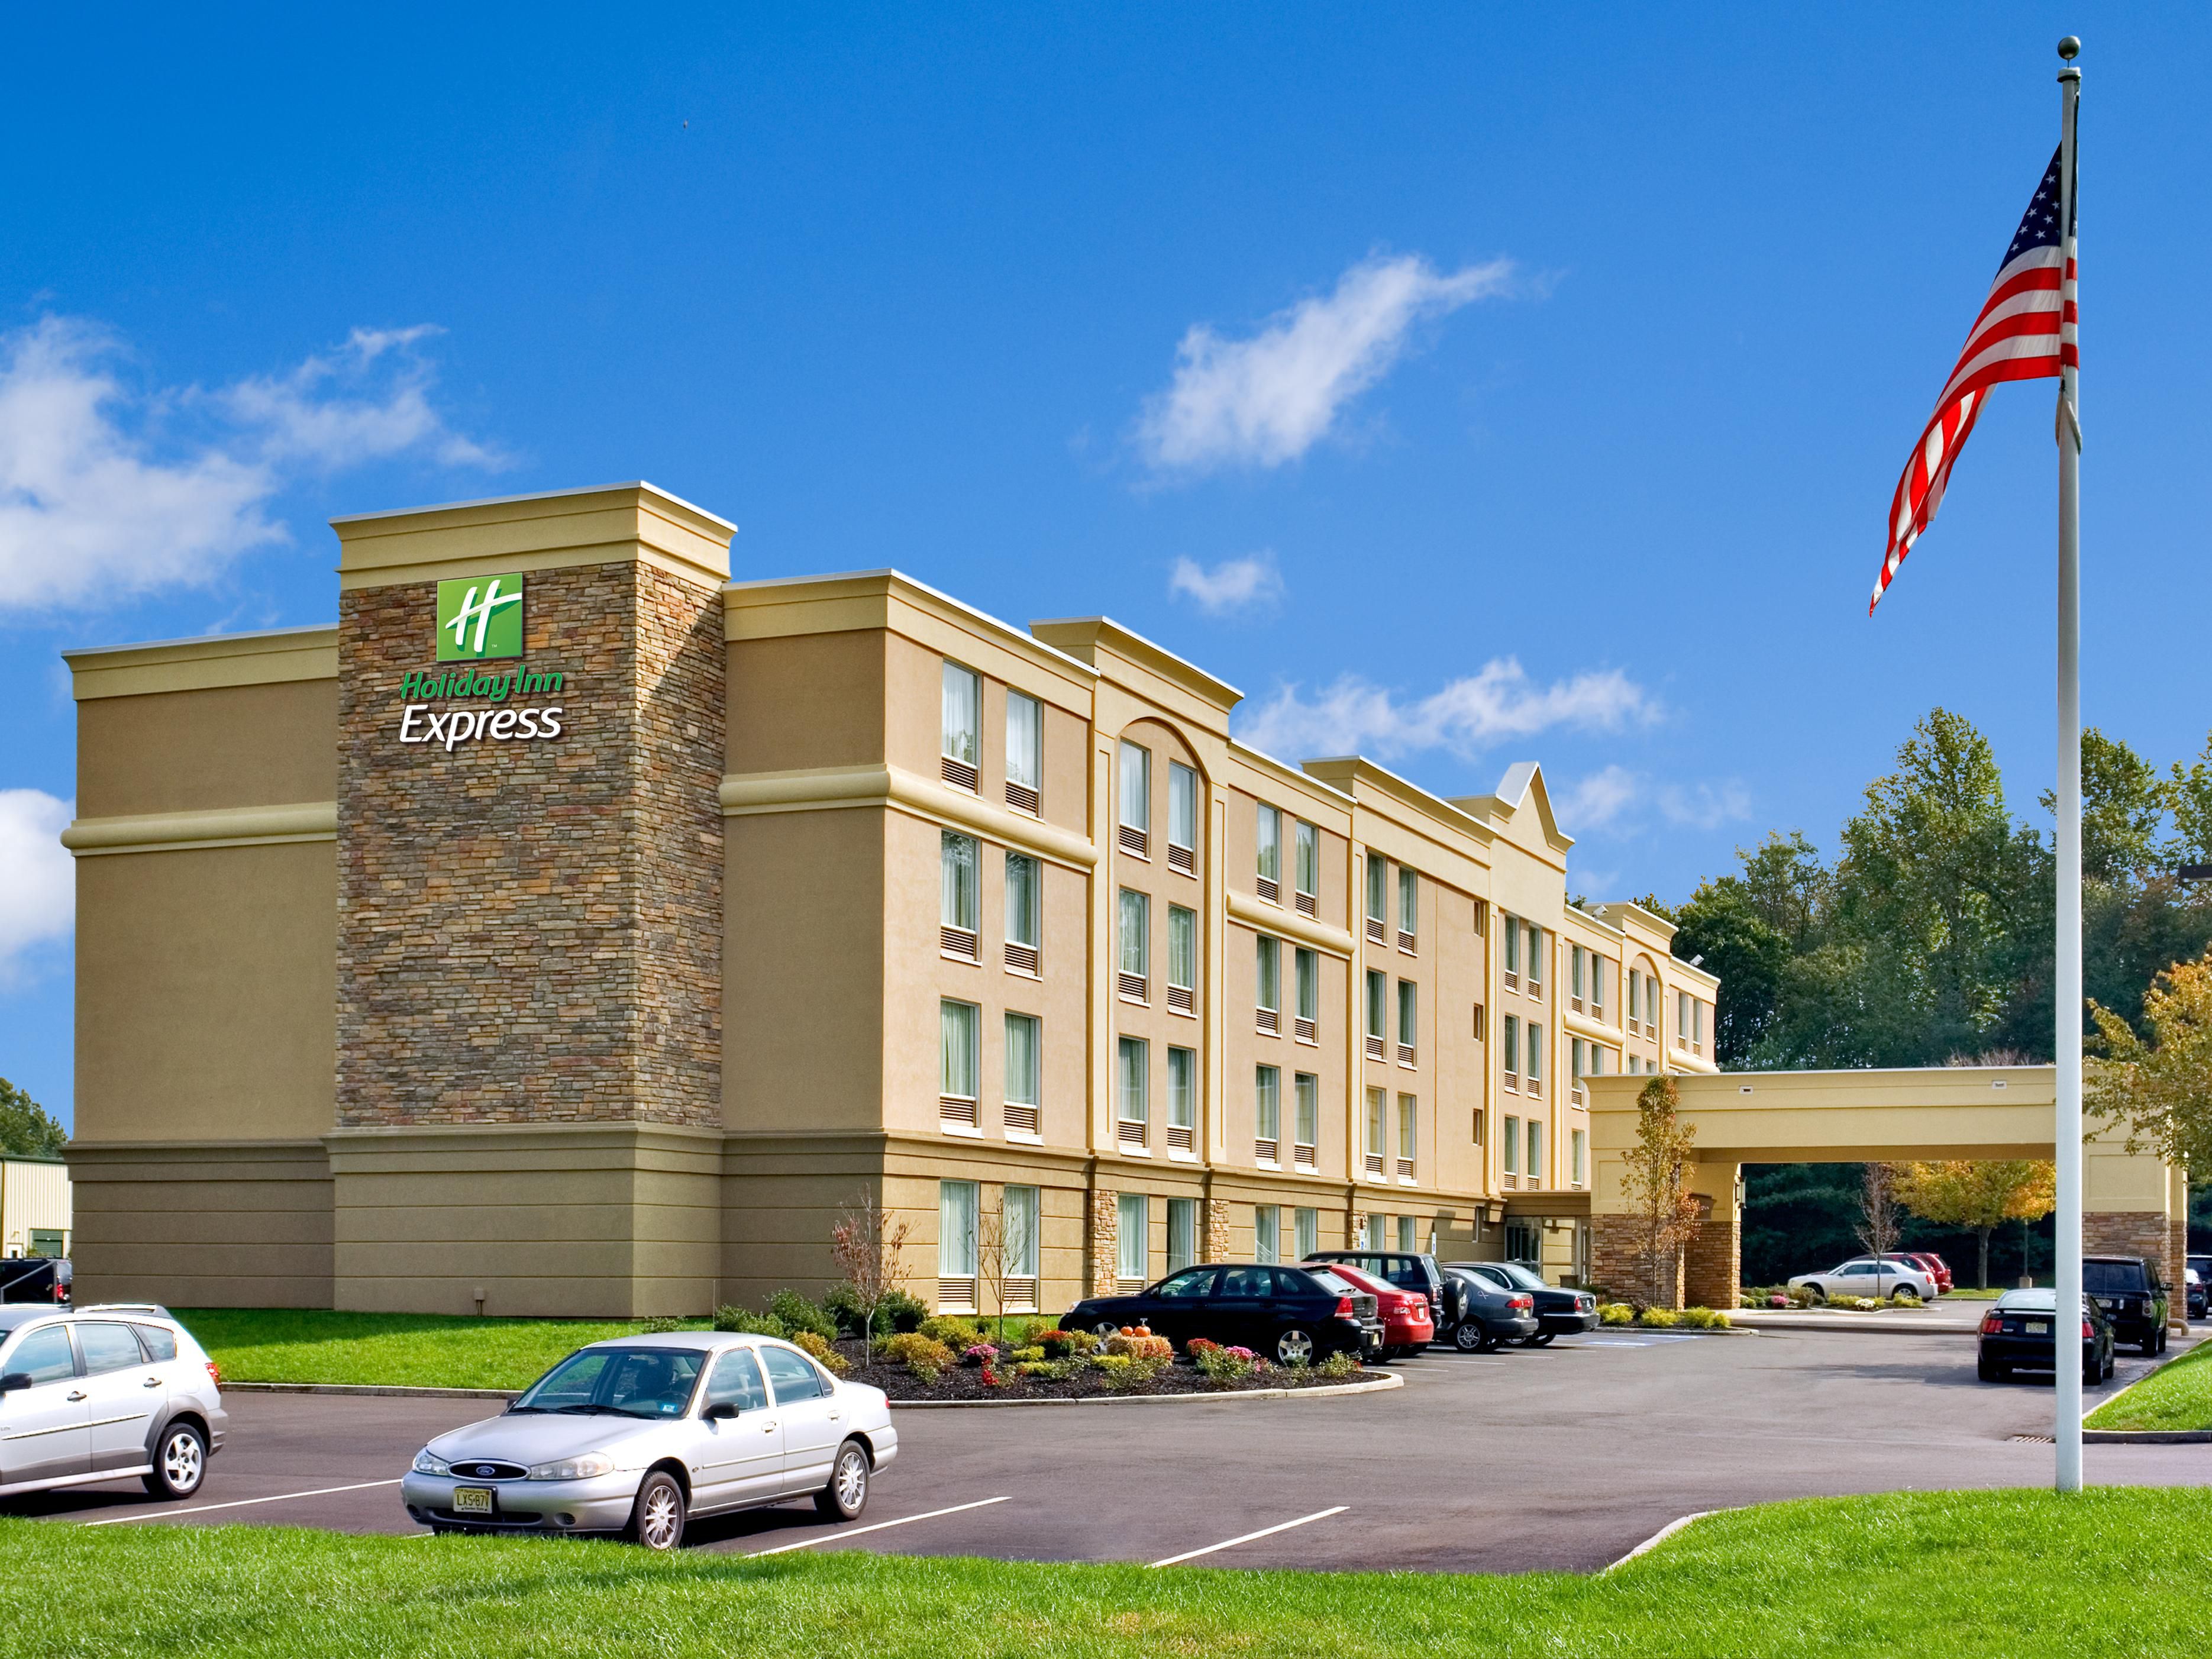 https://digital.ihg.com/is/image/ihg/holiday-inn-express-and-suites-west-long-branch-4390589177-4x3